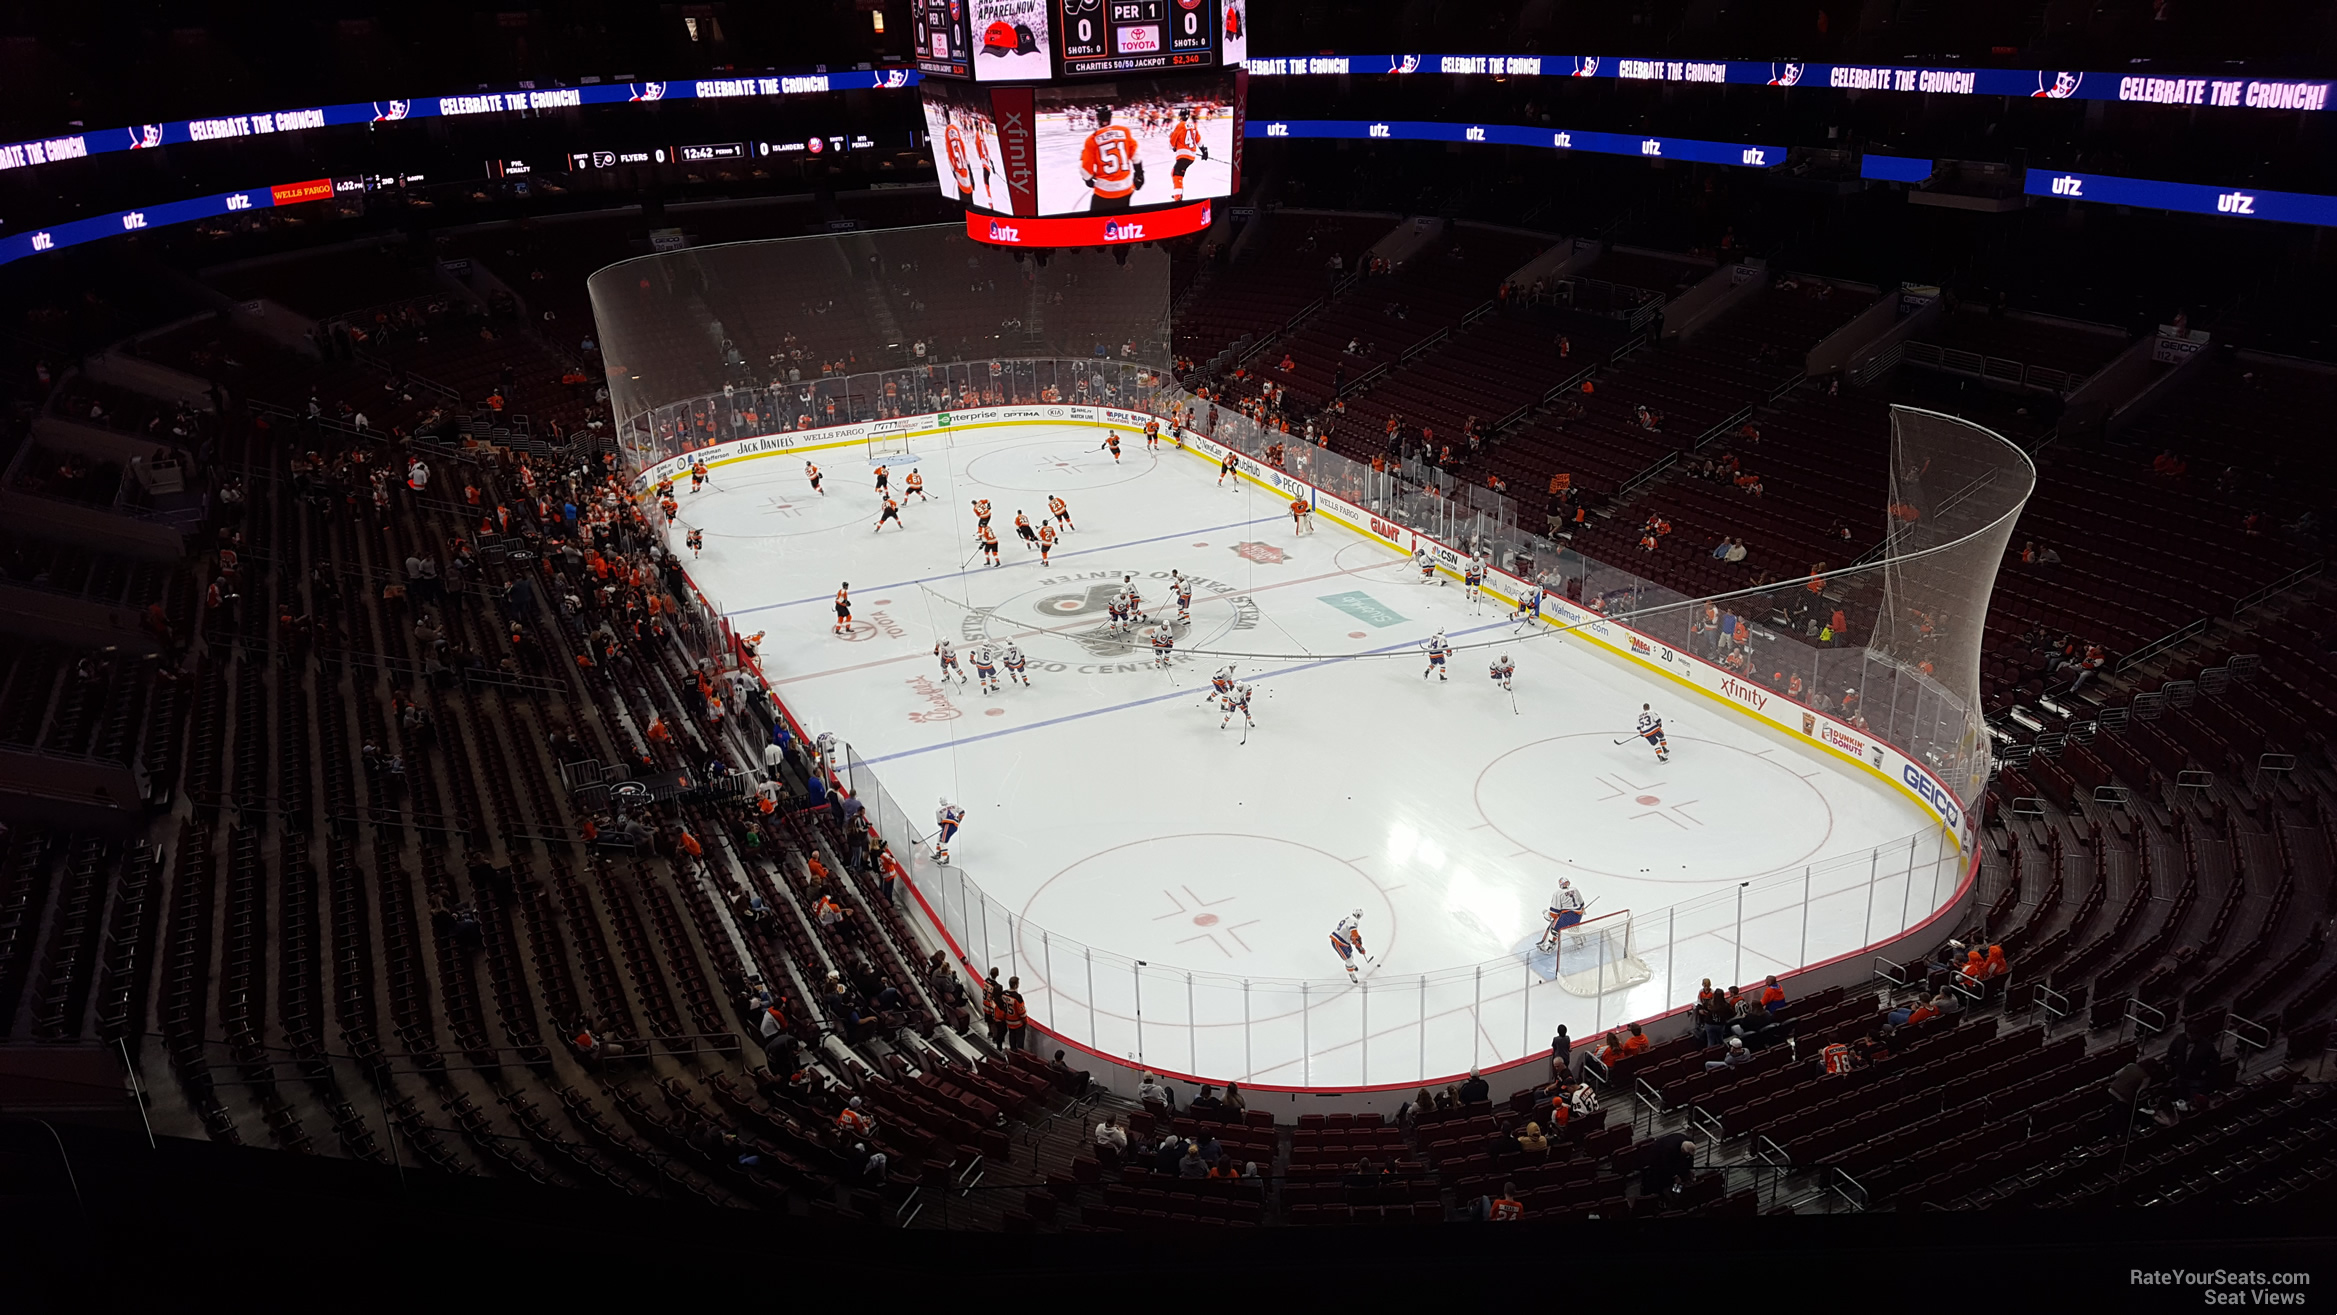 section 205a, row 8 seat view  for hockey - wells fargo center